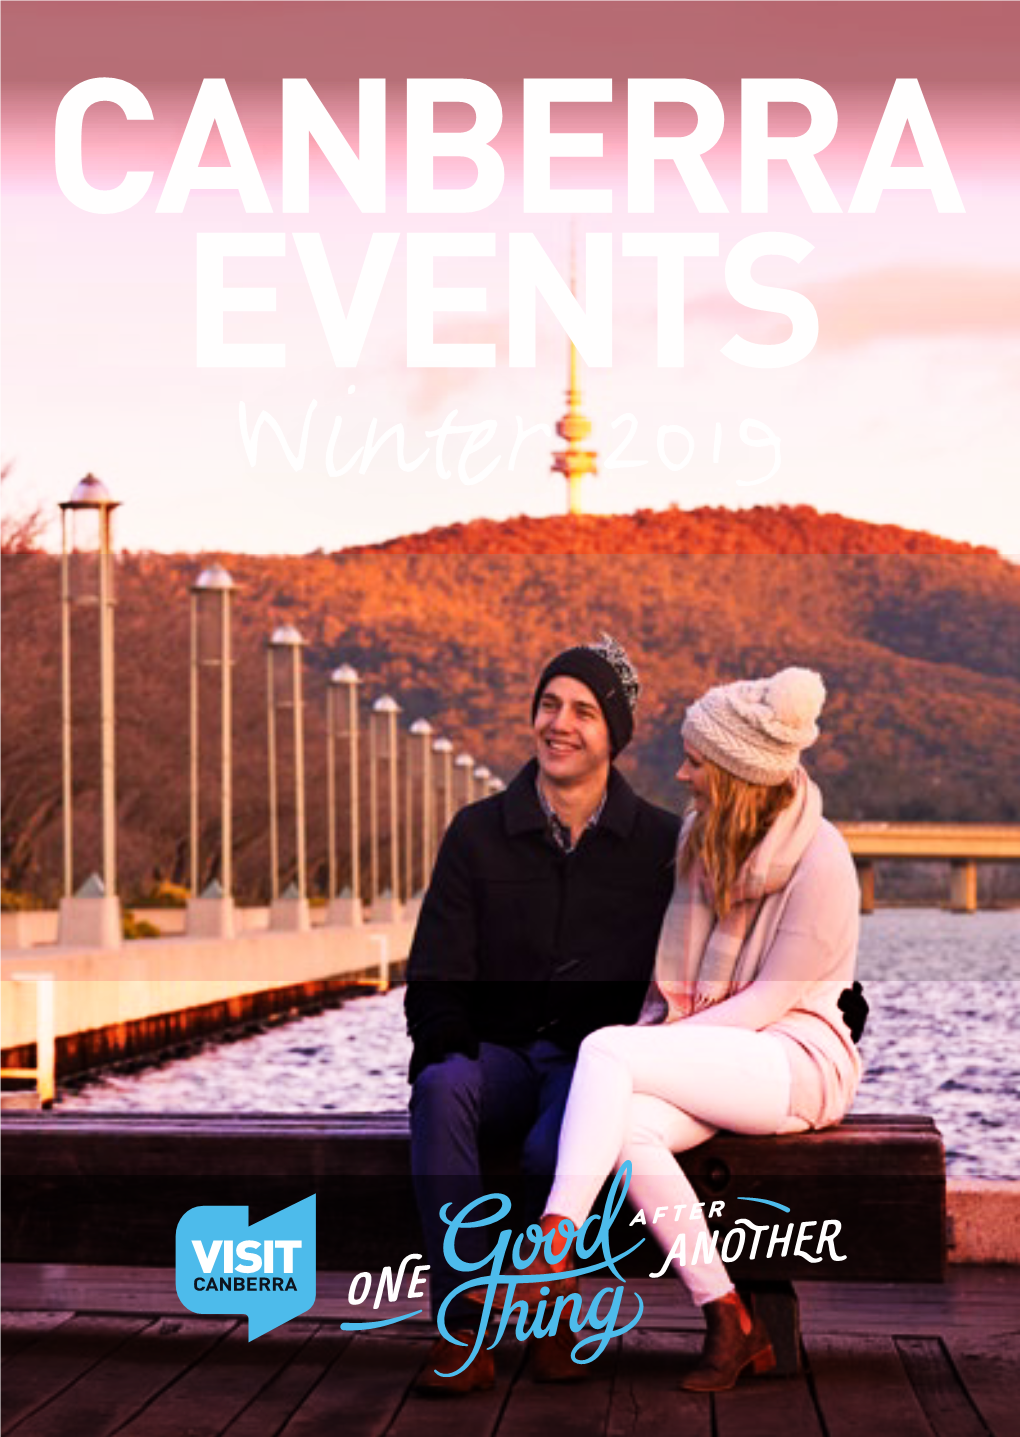 Canberra Events